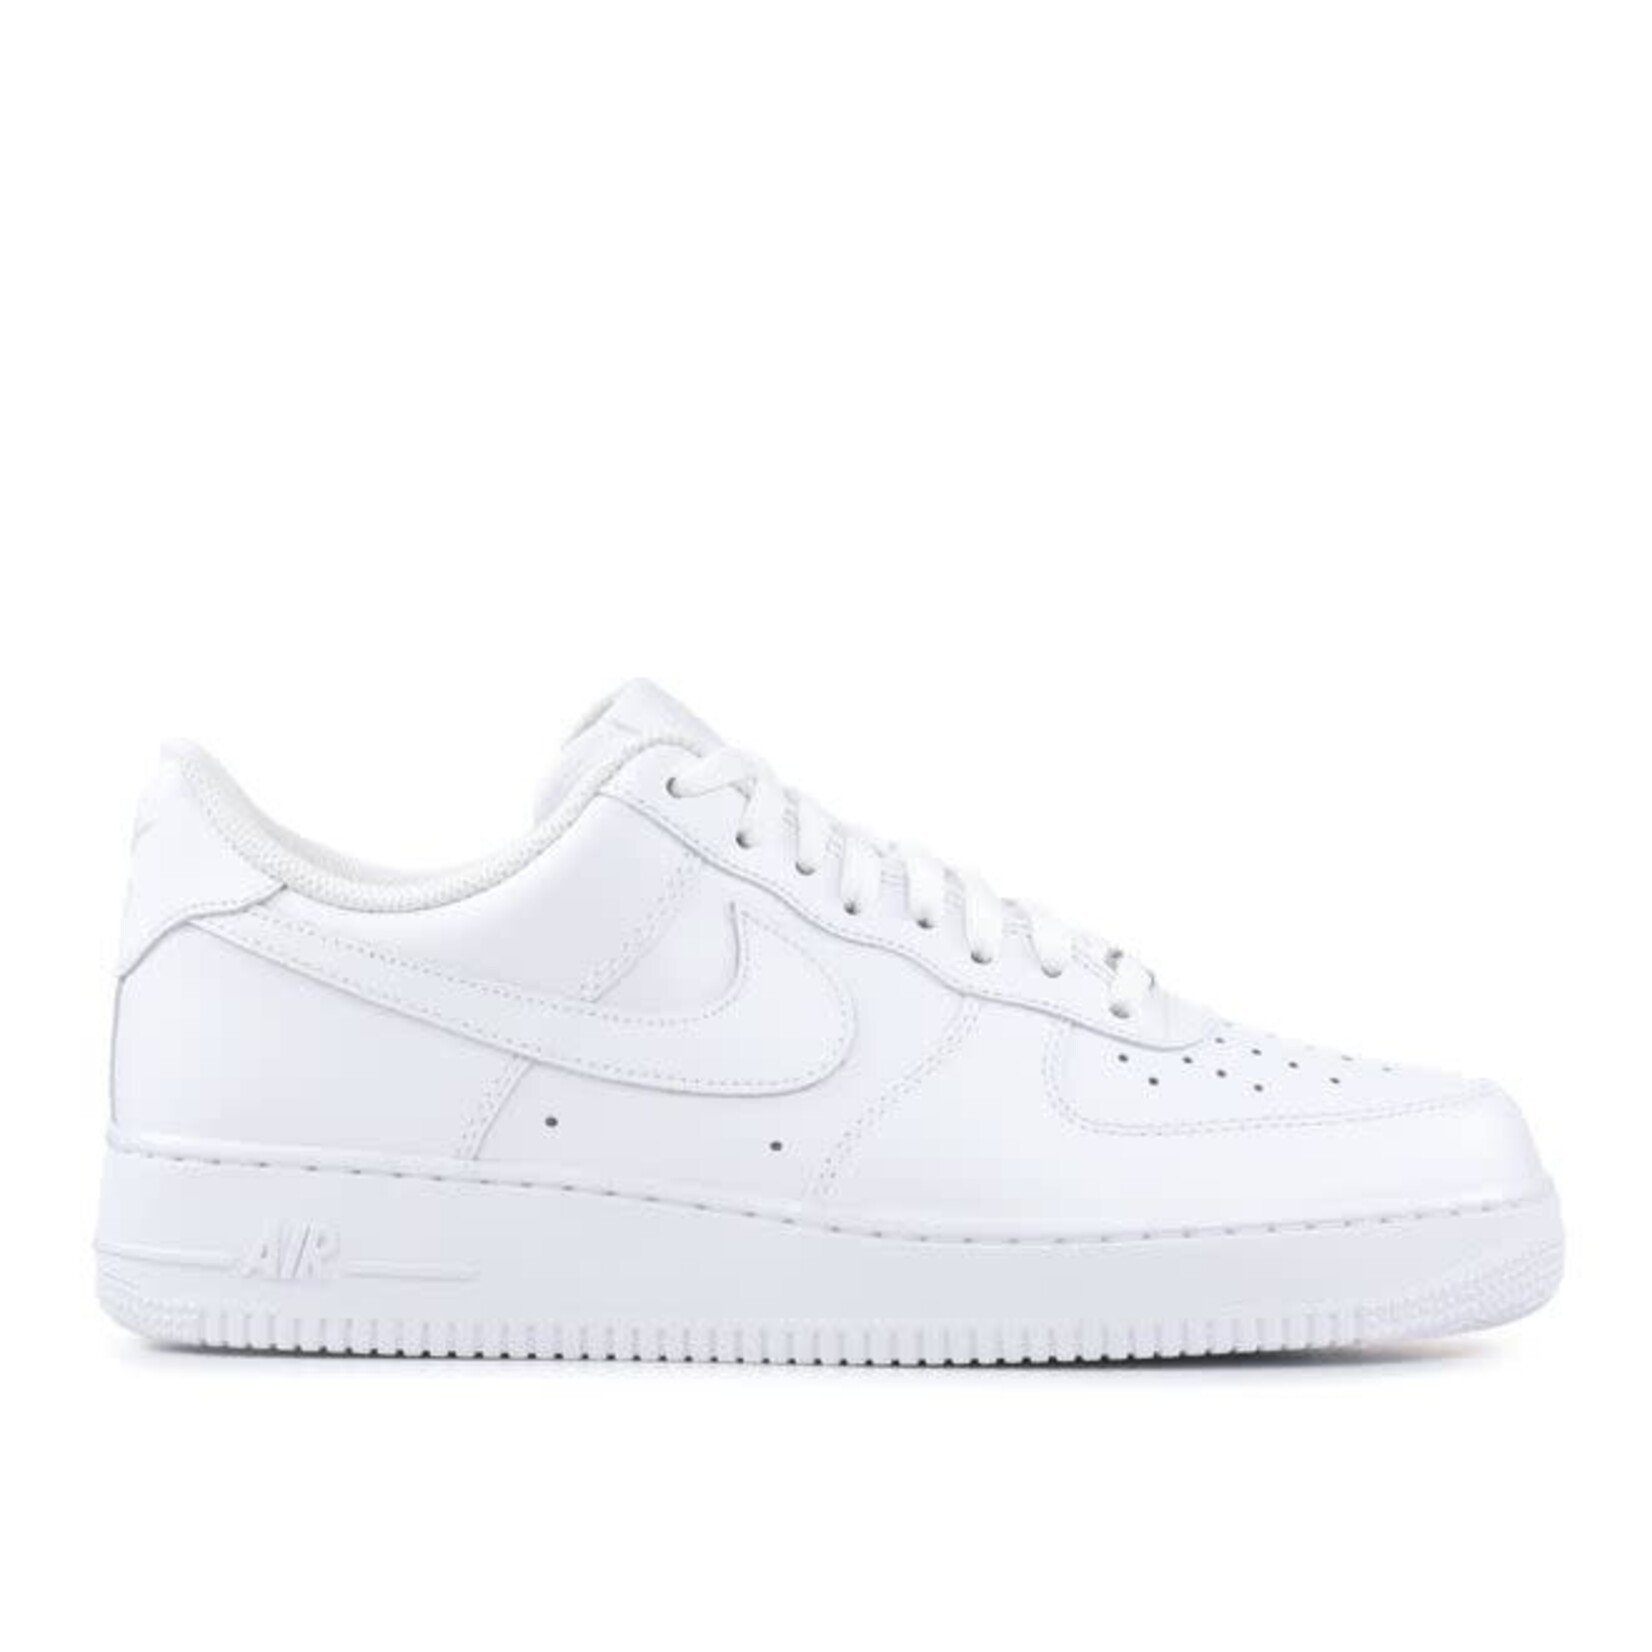 Nike Nike Air Force 1 Low '07 White Size 9, DS BRAND NEW